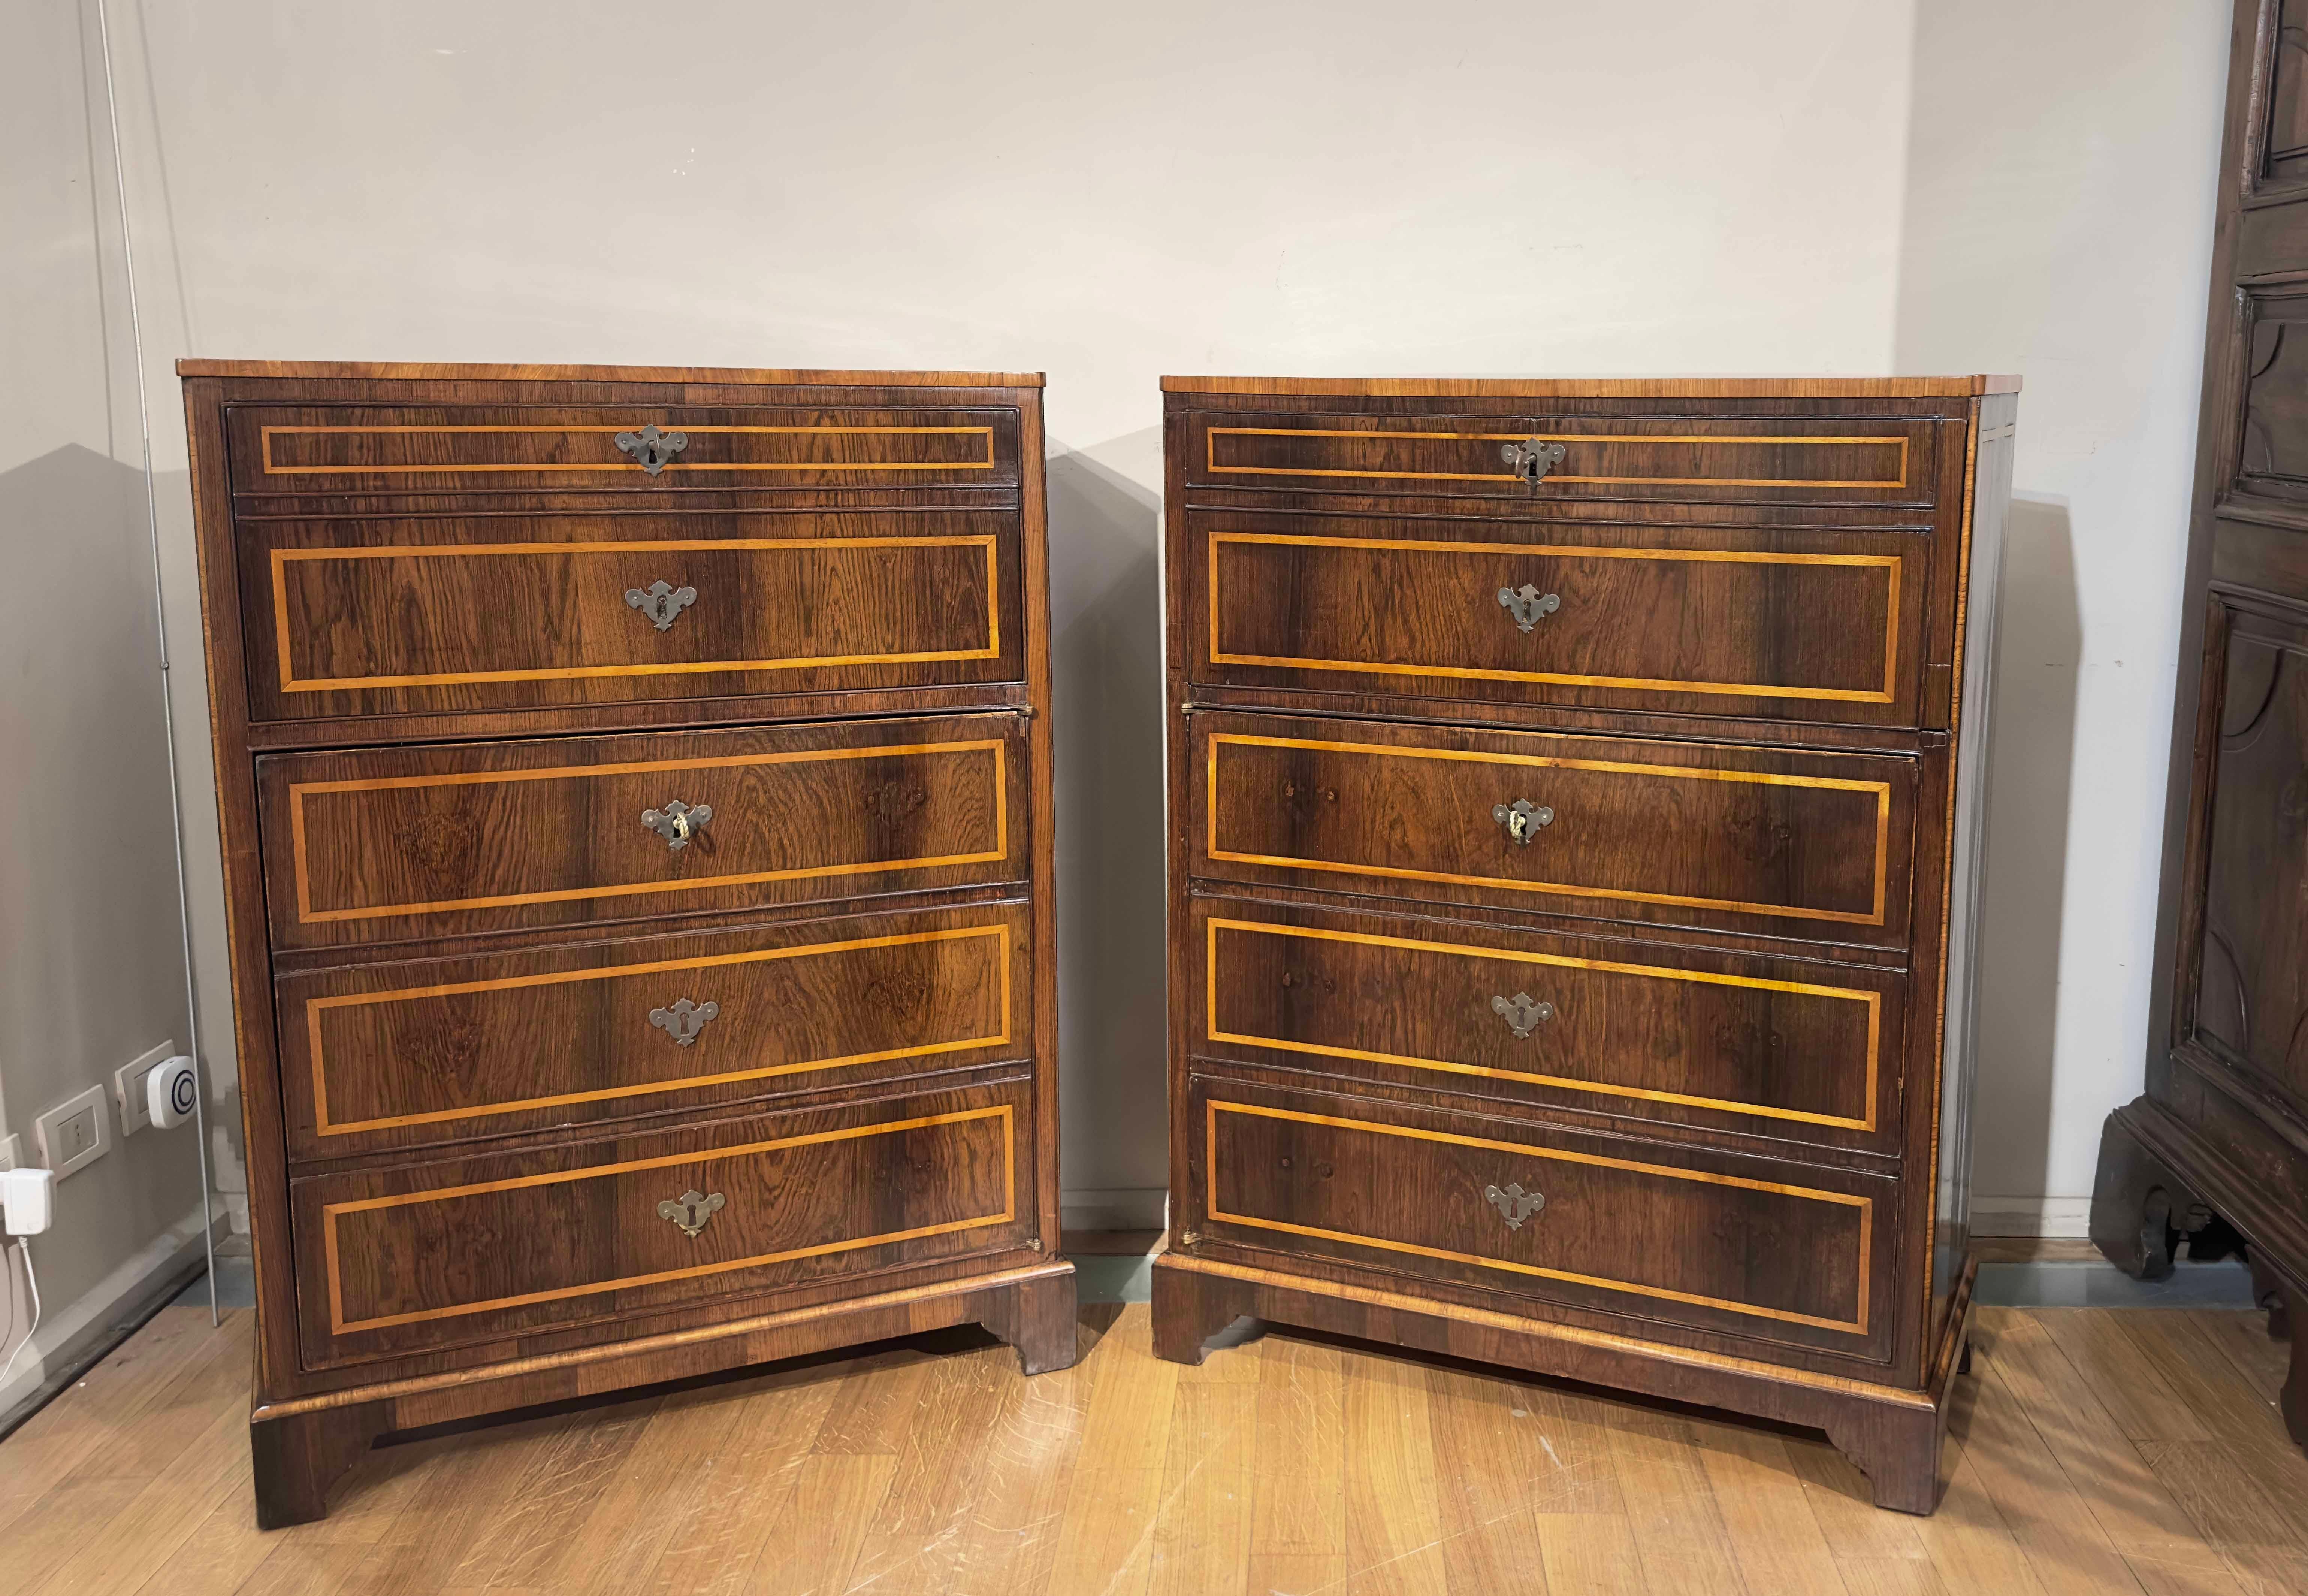 Pair of elegant sideboard cabinets with folding shelf, which transforms them into functional 